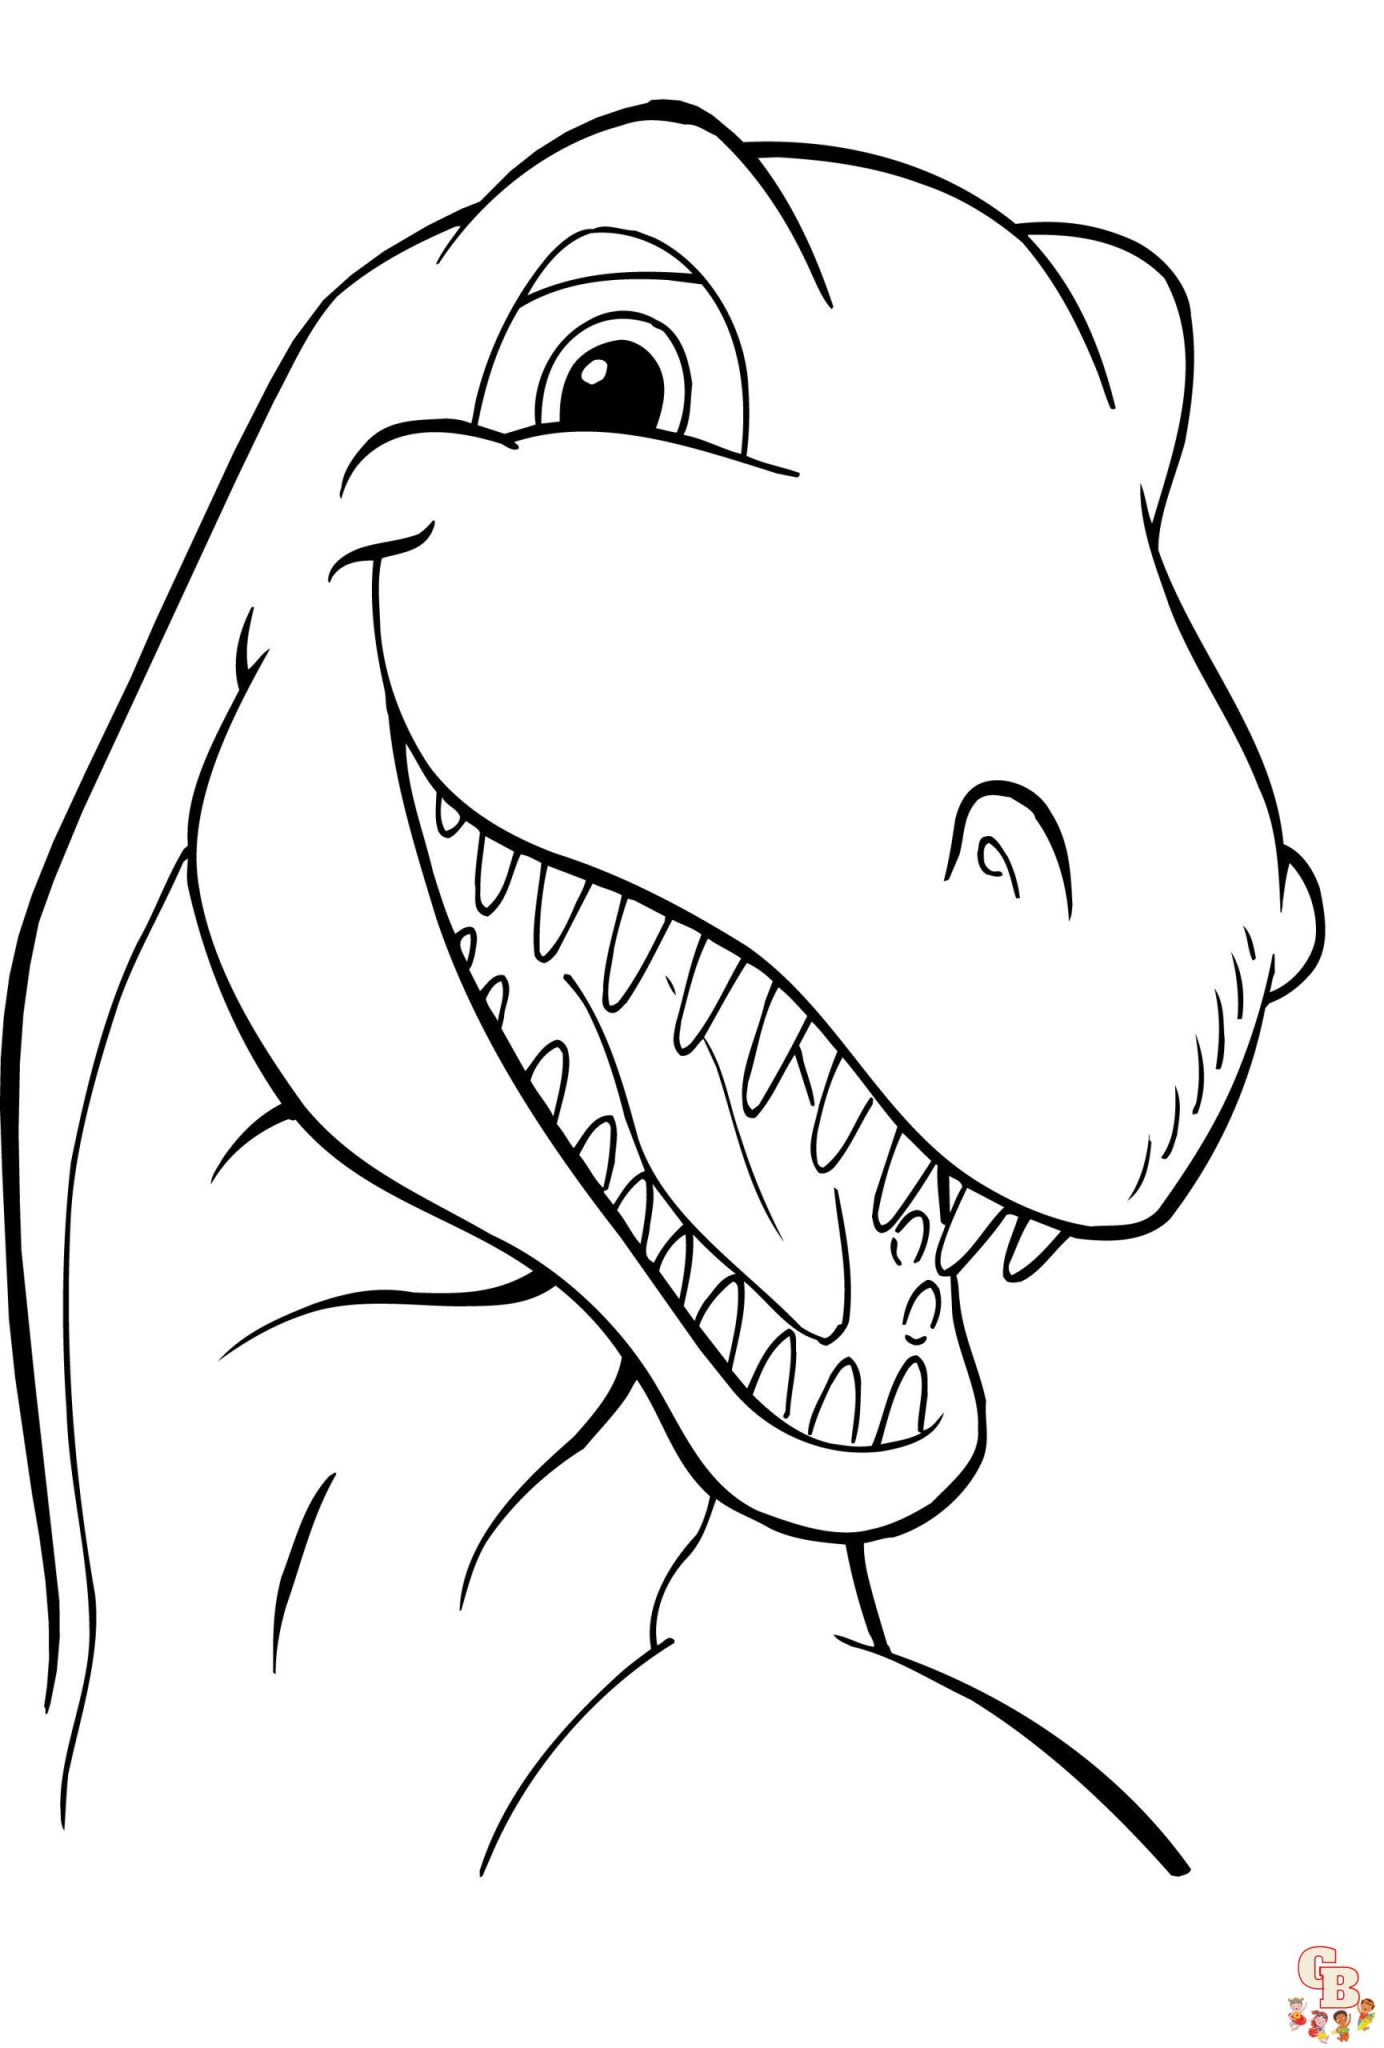 The best Dinosaur coloring pages for kids - GBcoloring